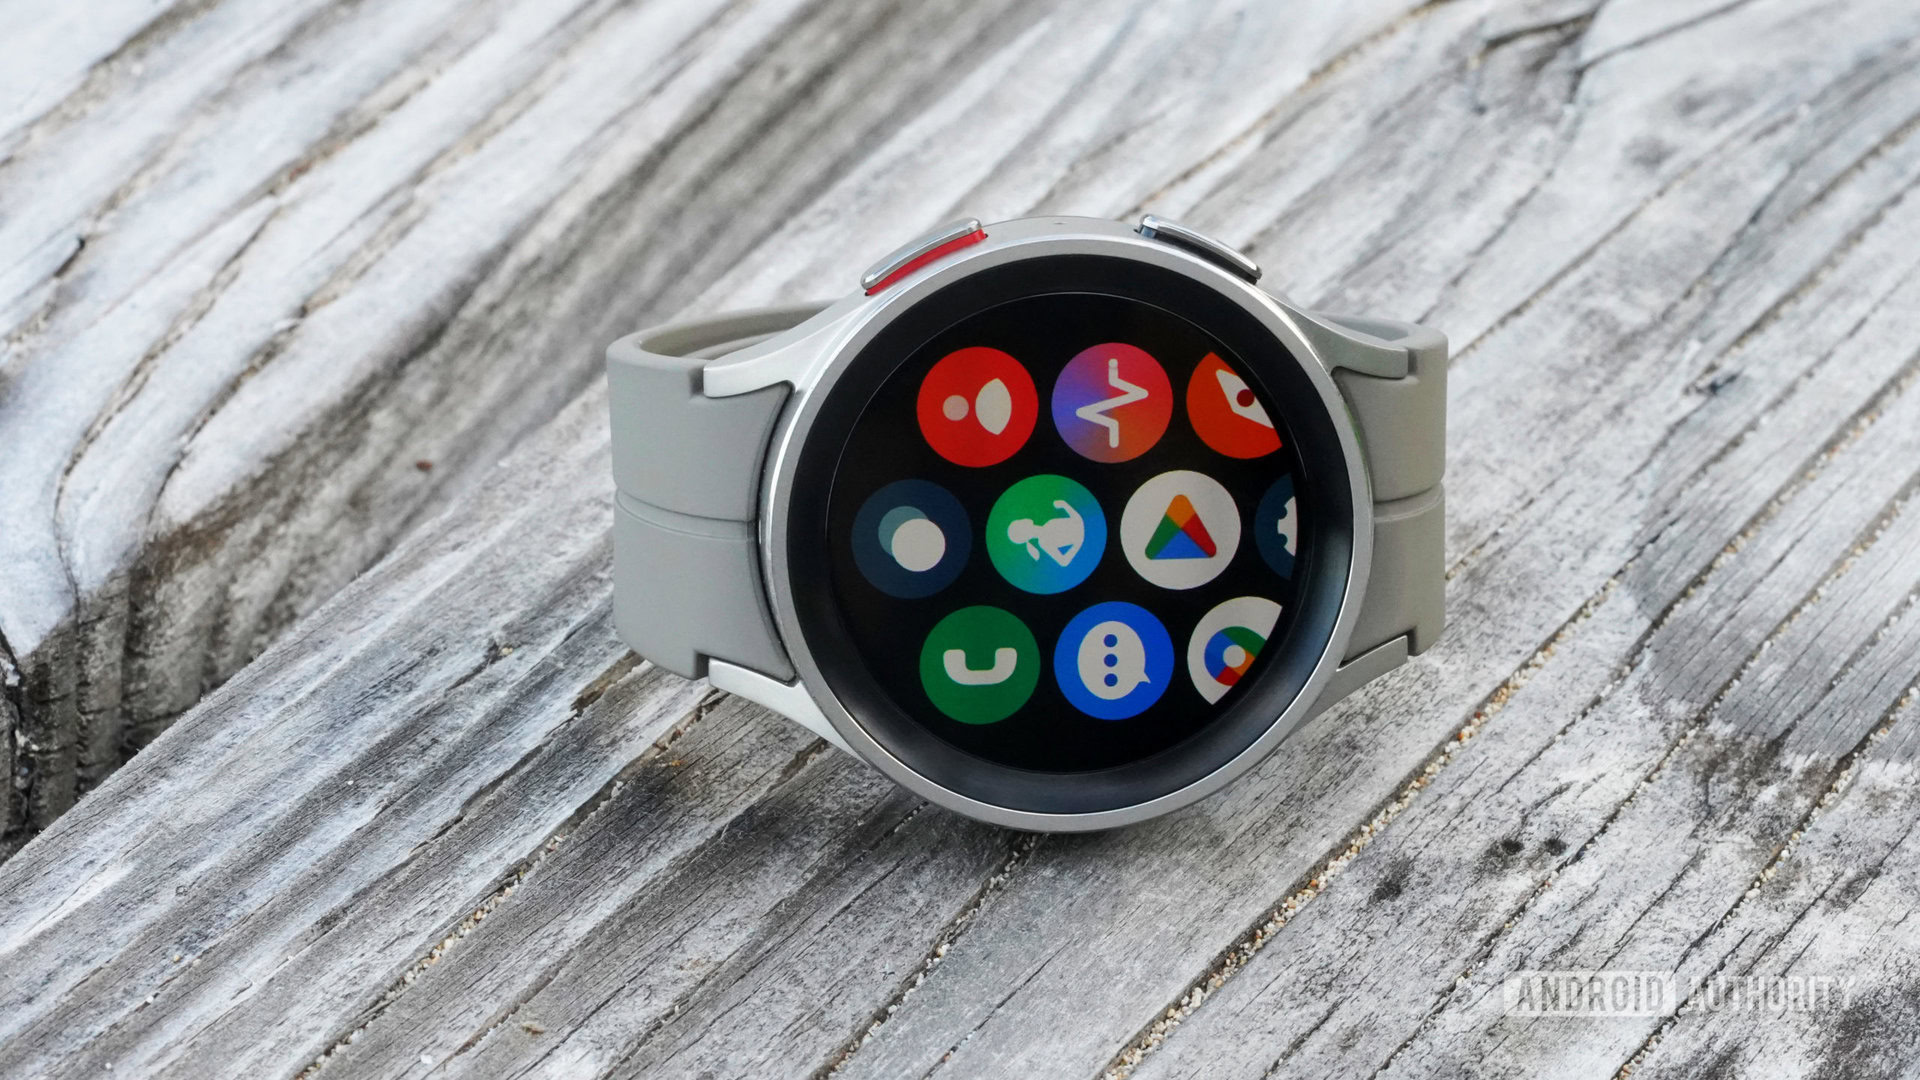 Xiaomi might compete with Samsung with its Wear OS 3 smartwatch - SamMobile